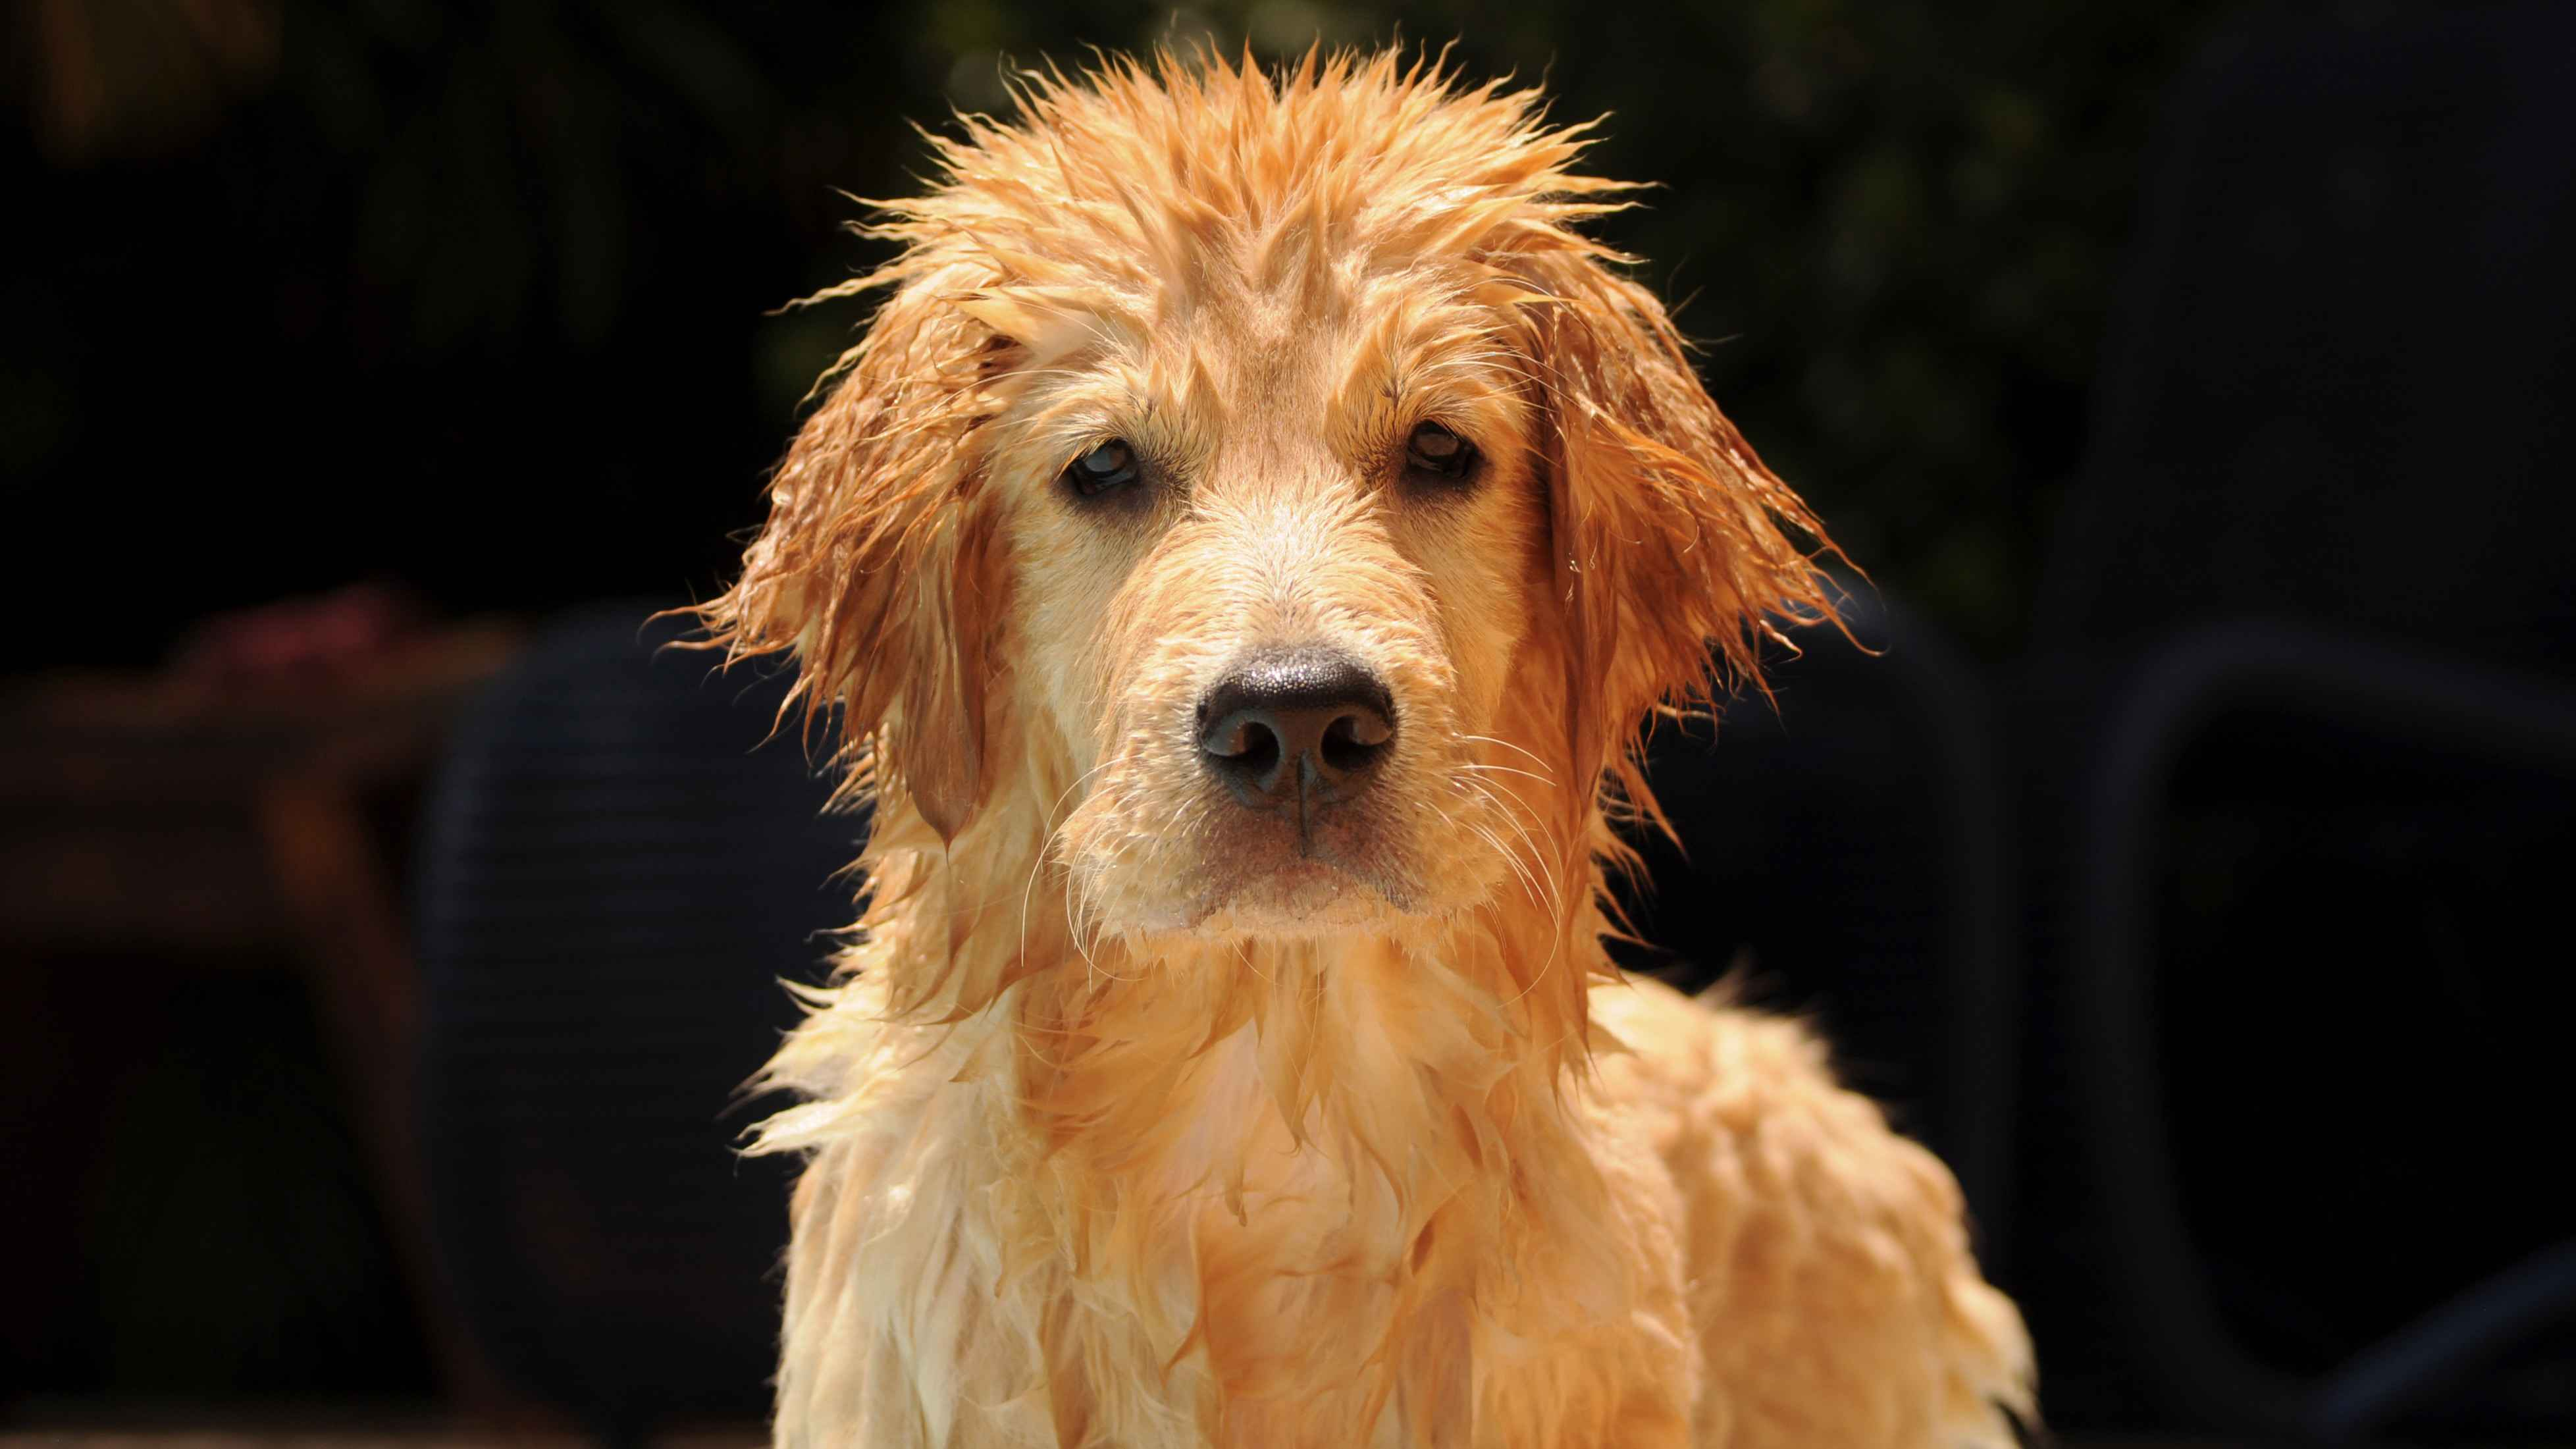 5 Effective Tips to Keep Your Golden Retriever's Coat Clean and Free of Debris